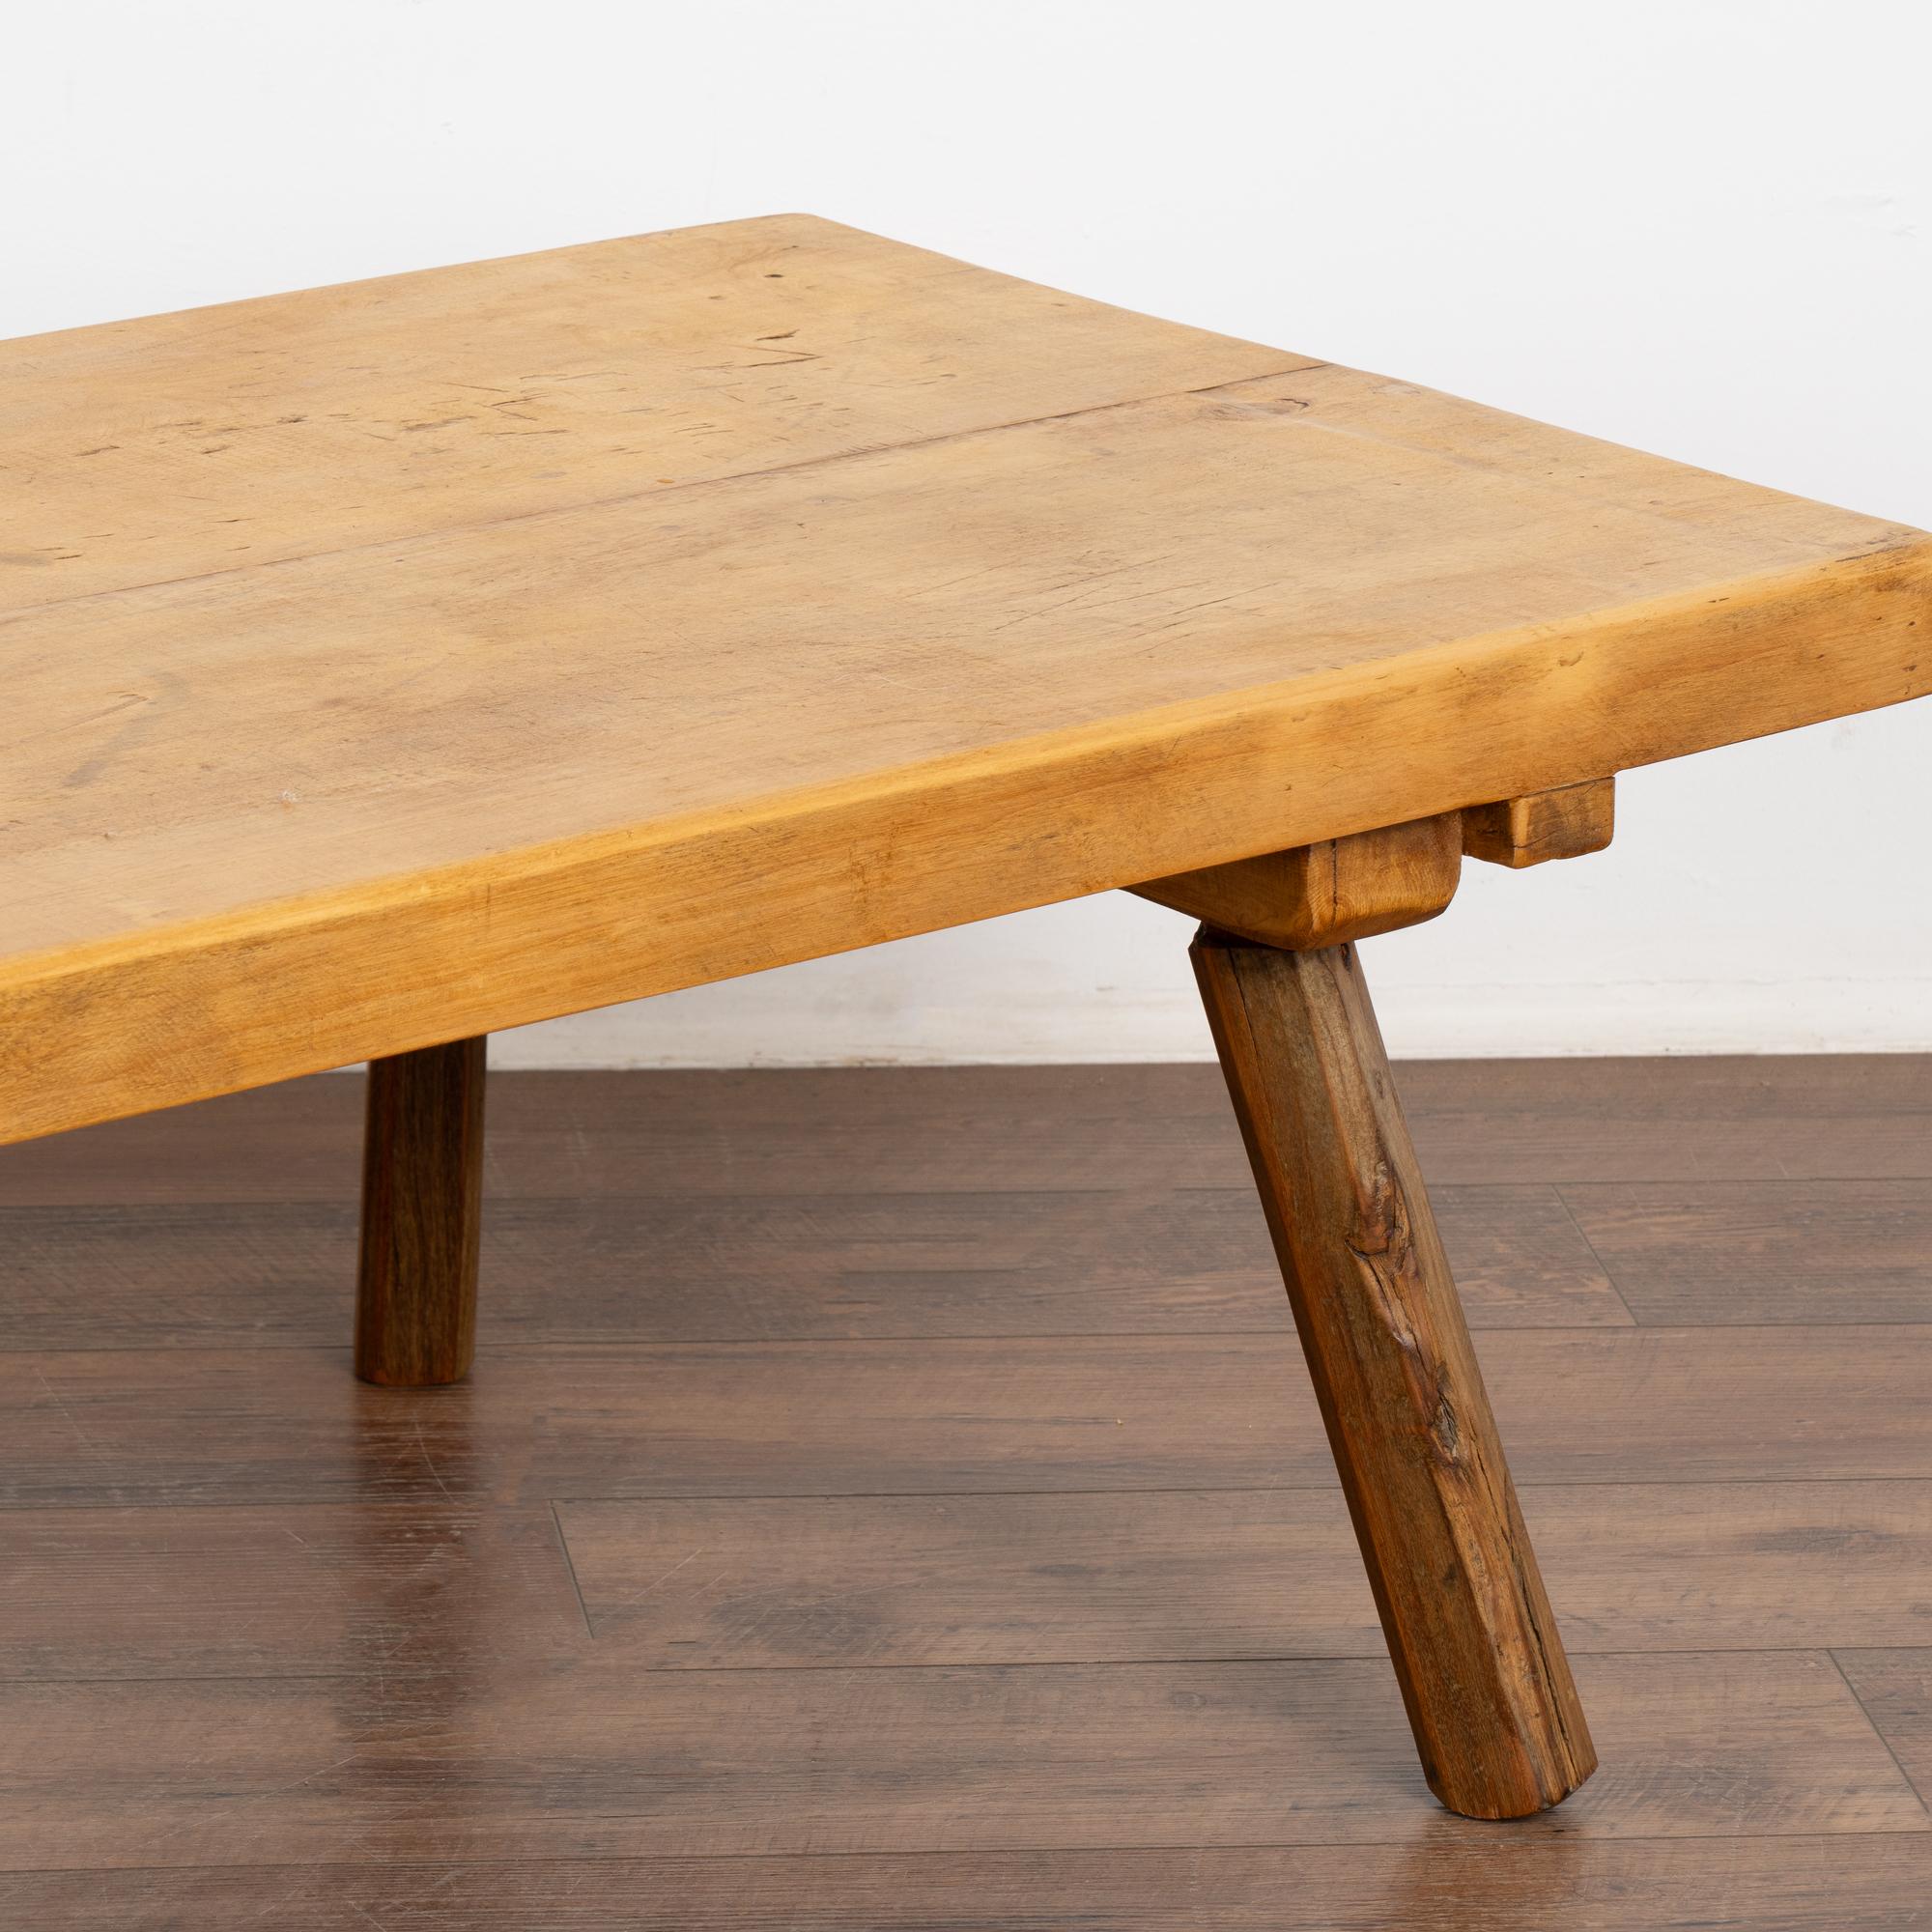 20th Century Rustic Coffee Table With Peg Legs, Hungary circa 1900 For Sale